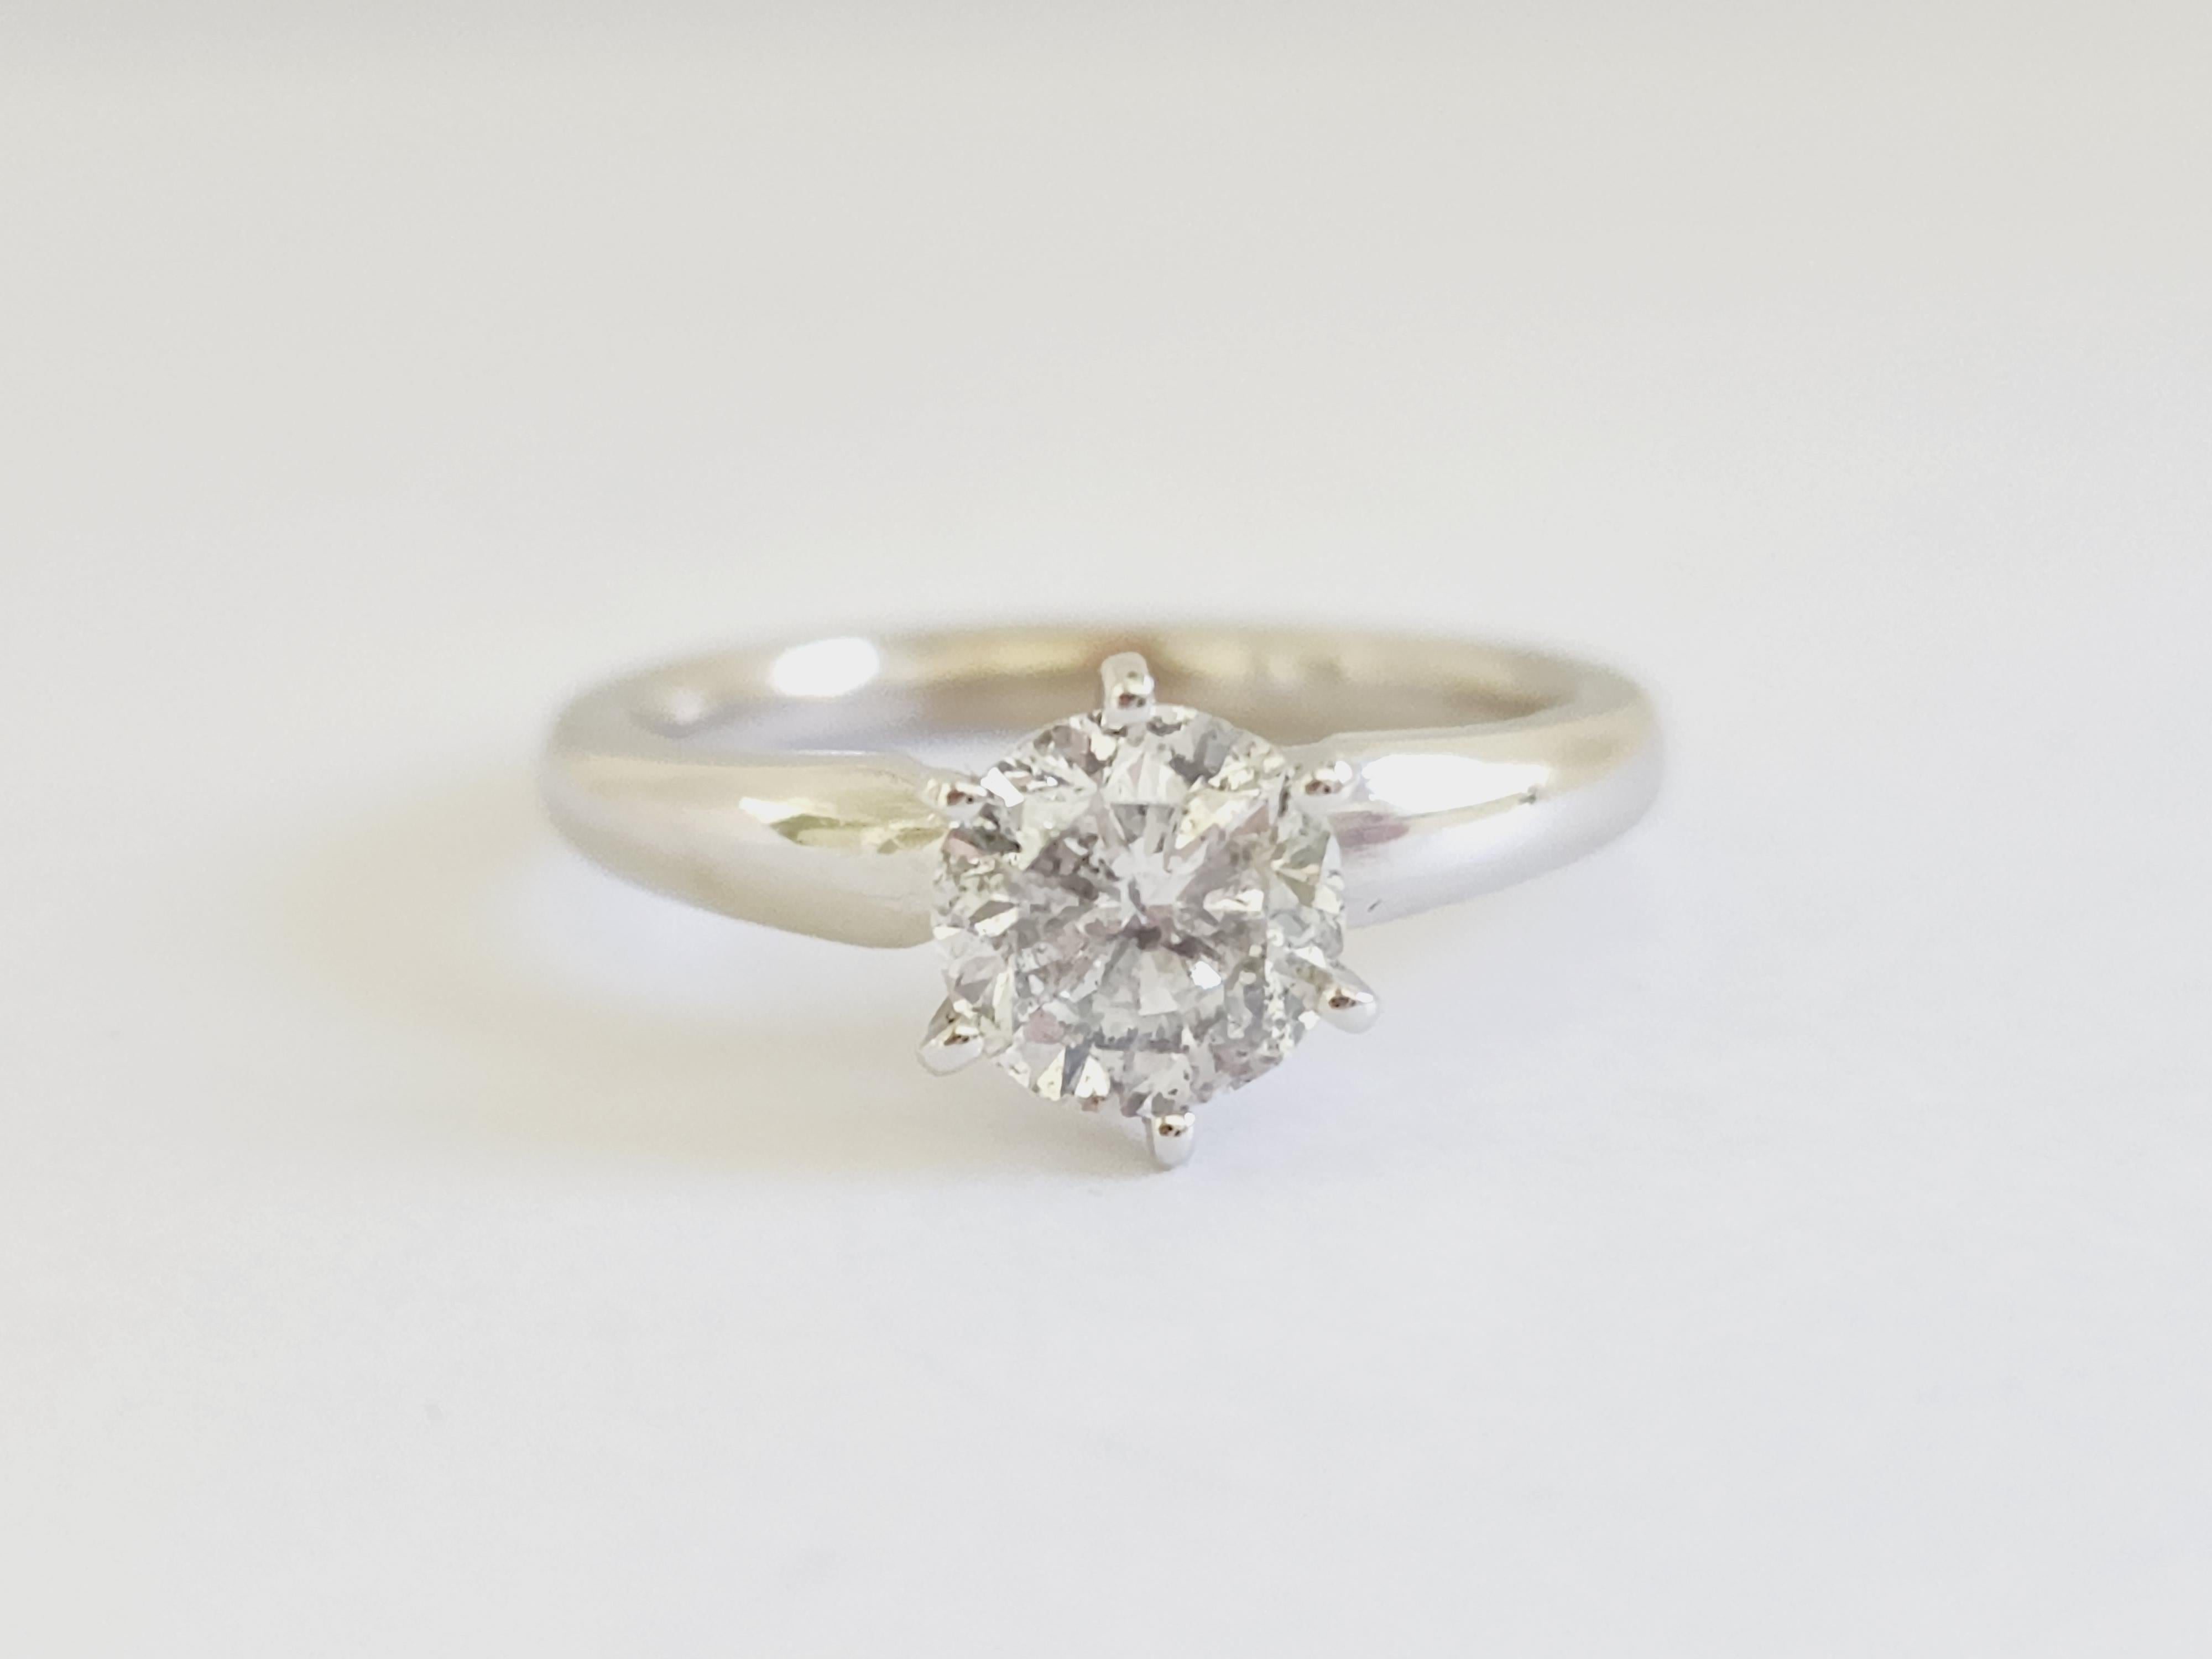 1.16 ct round brilliant cut natural diamonds. 6 prong solitaire setting, set in 14k white gold. Ring Size 6.5.